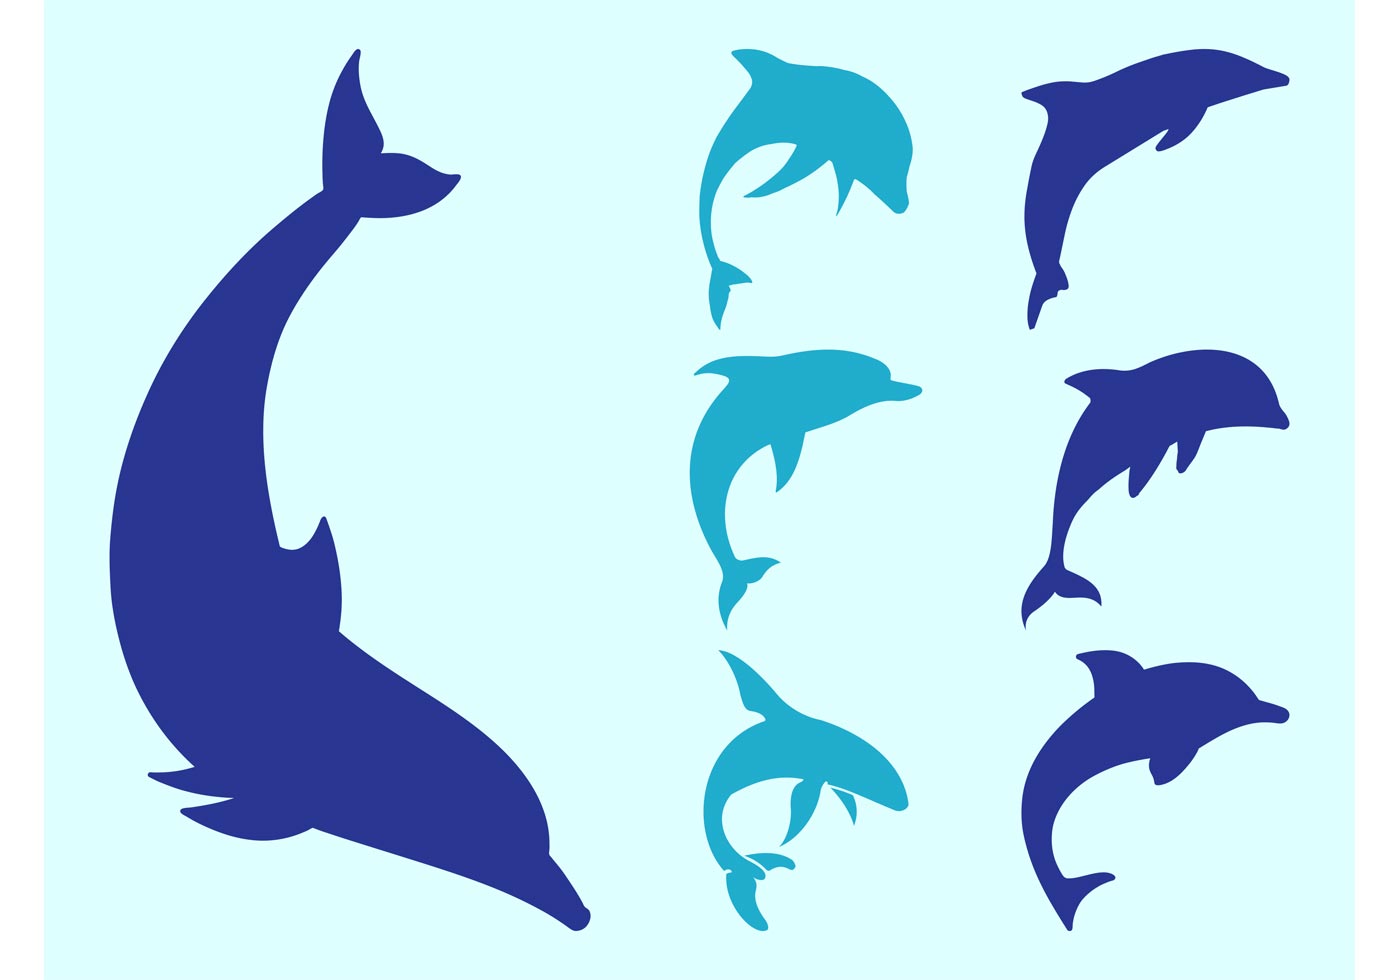 Dolphin Silhouettes - Download Free Vector Art, Stock Graphics & Images